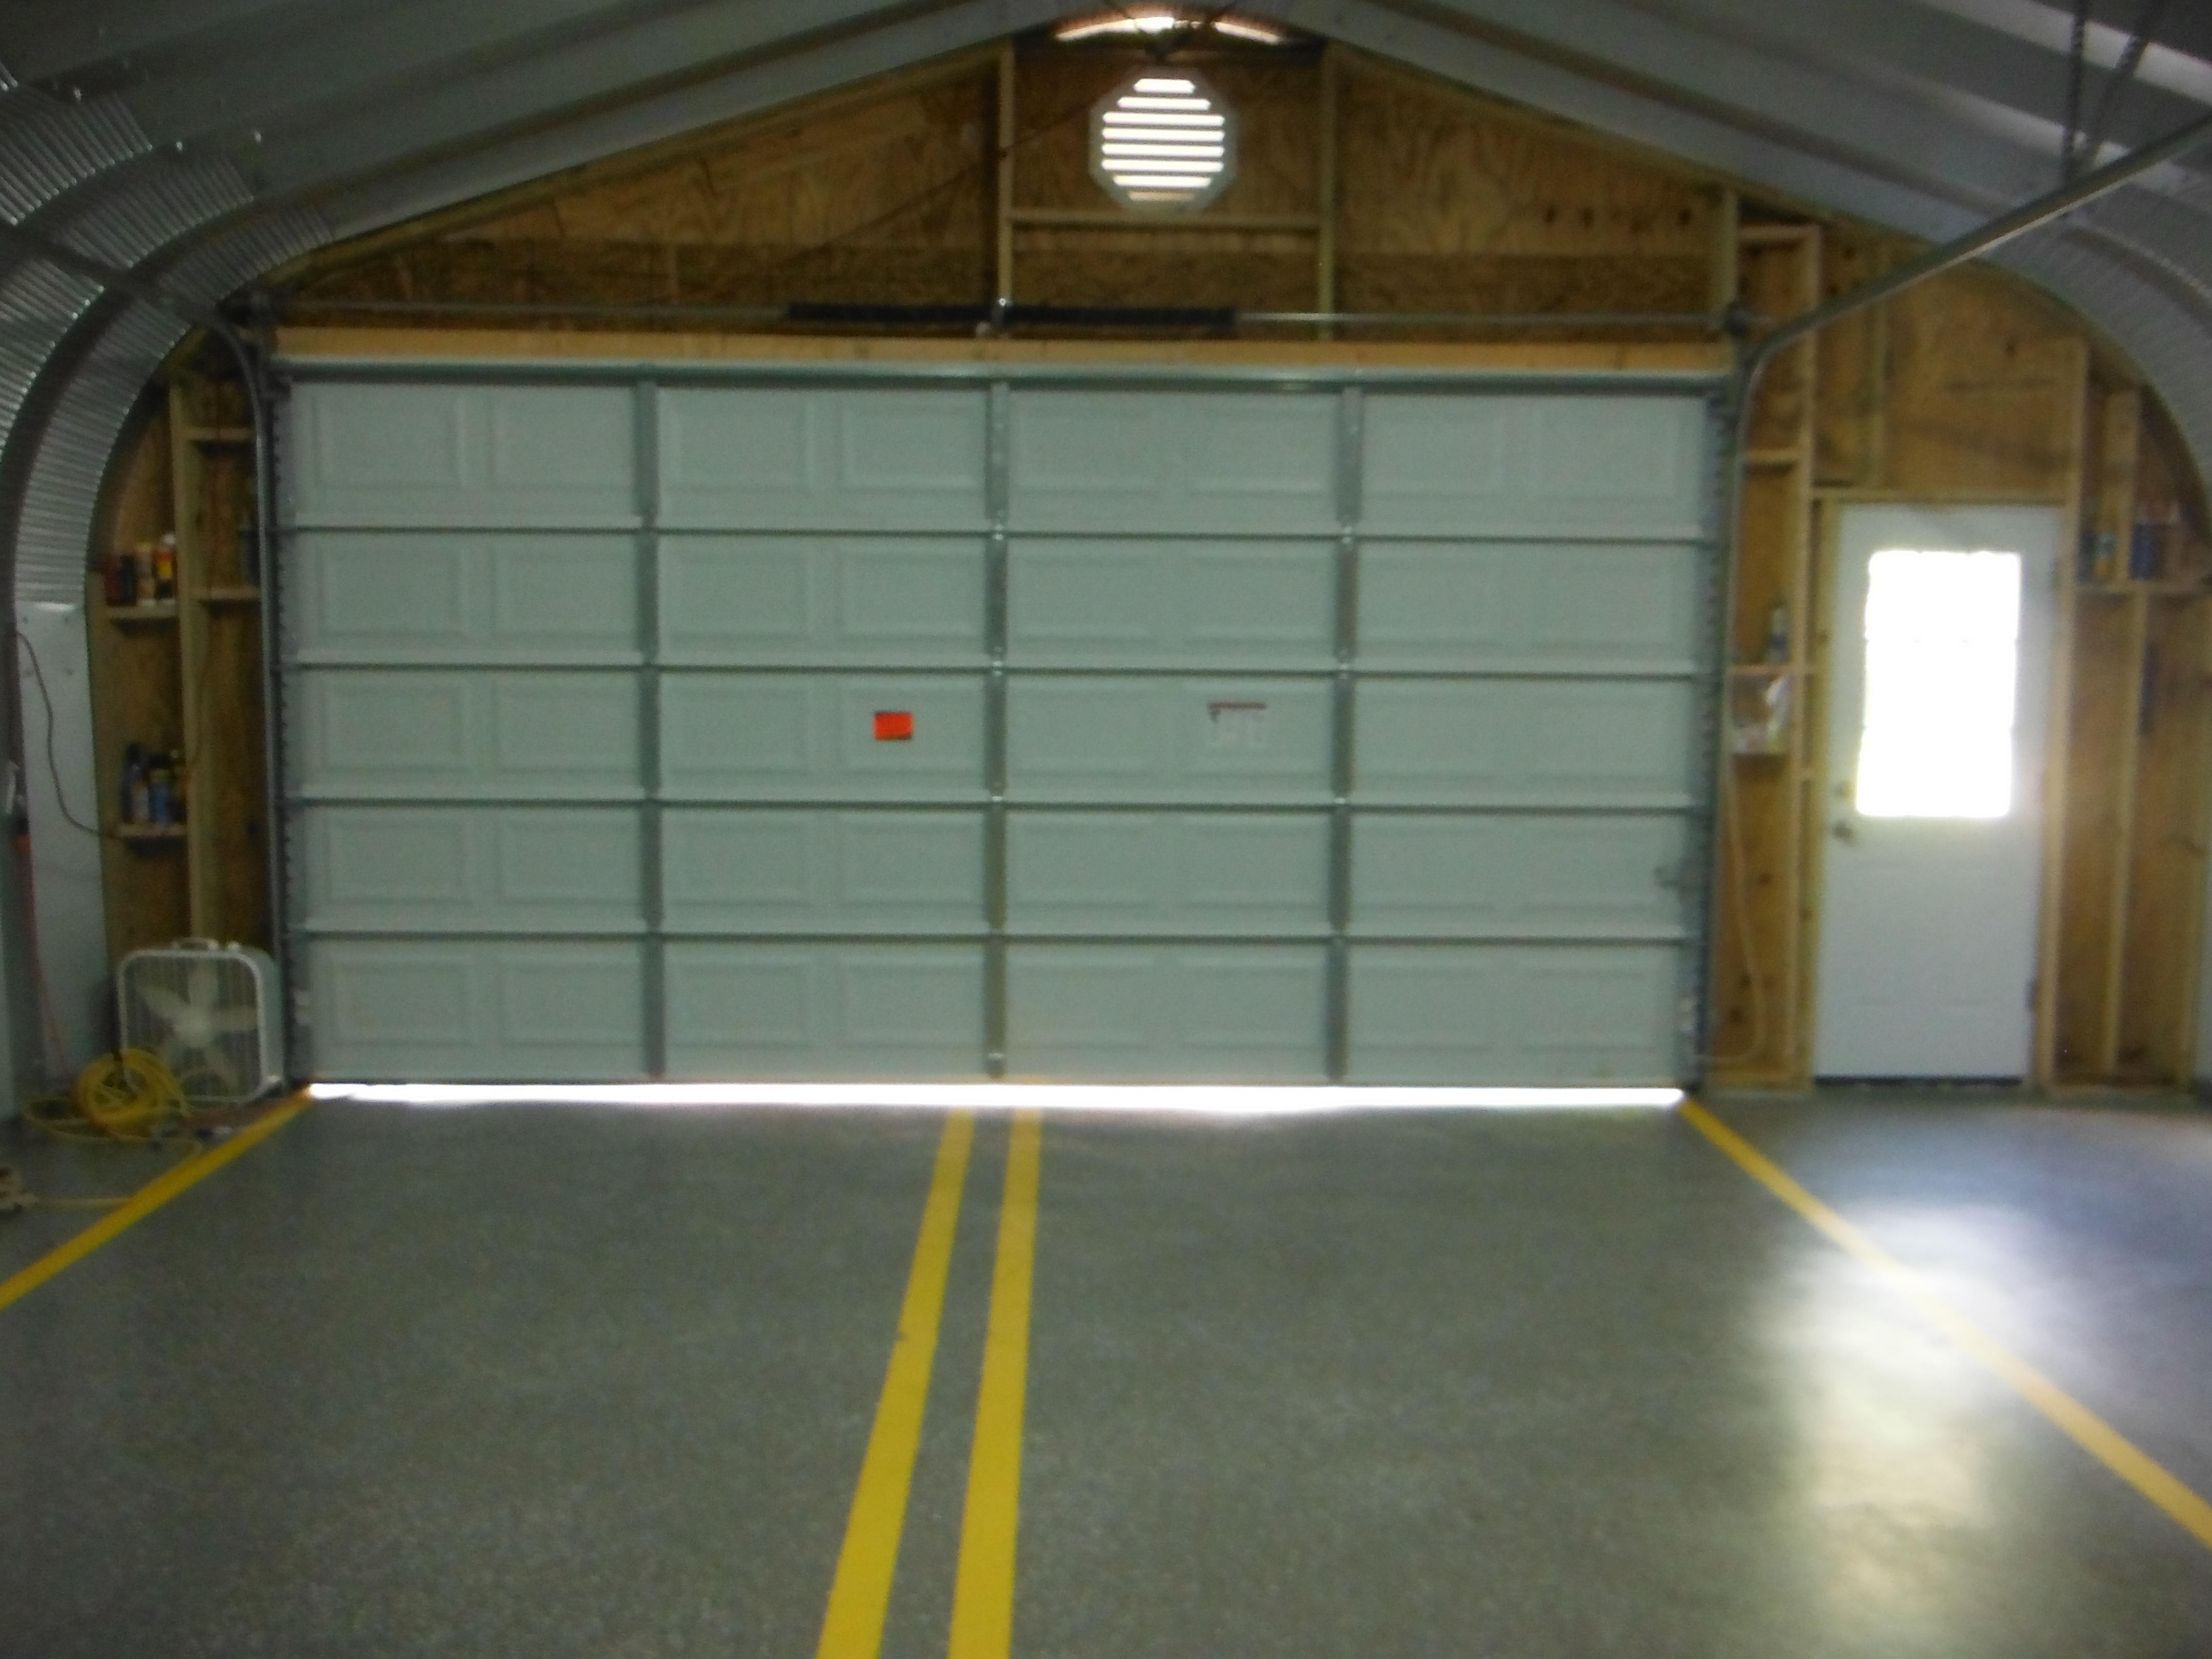 A - ModelOutfitted with garage & entry way door